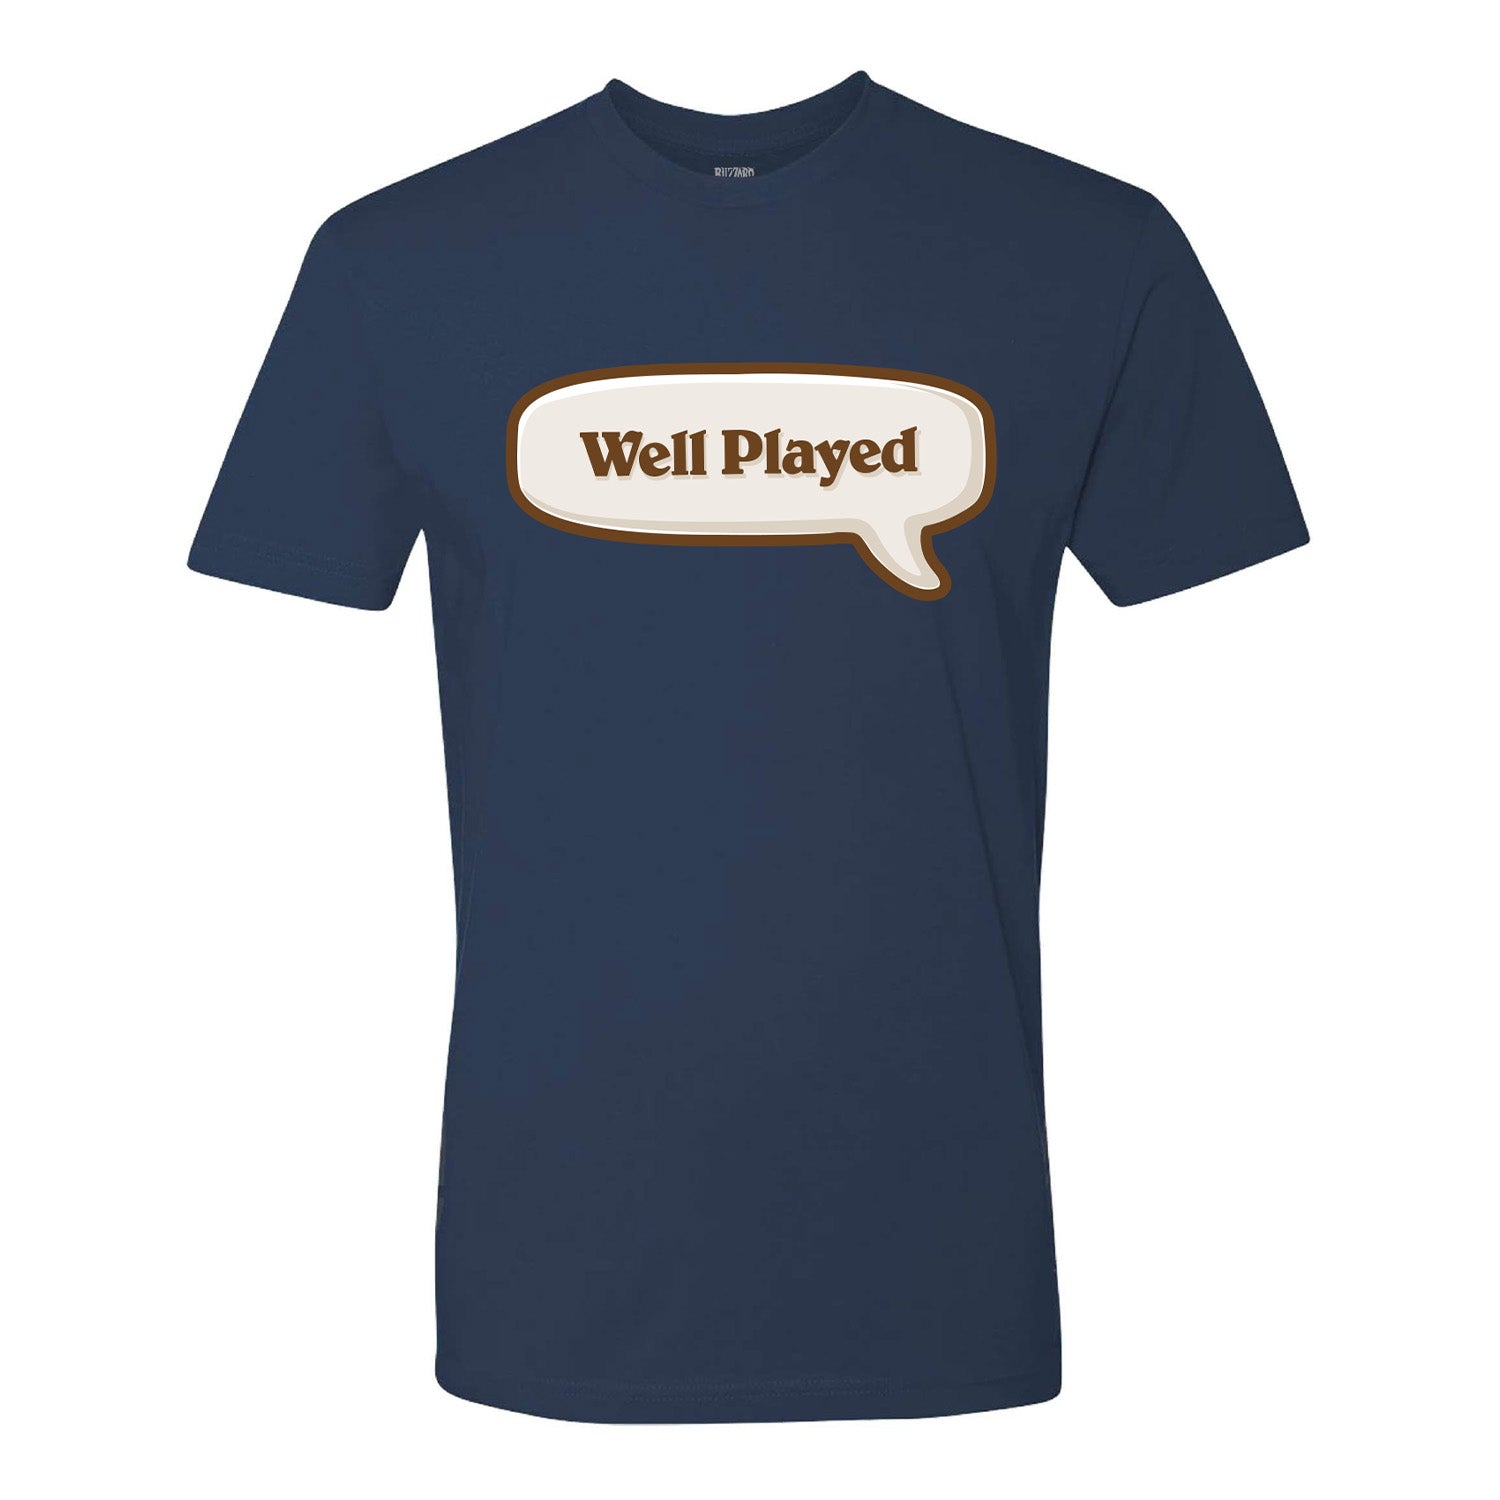 Hearthstone Well Played T-Shirt - Front View Indigo Version